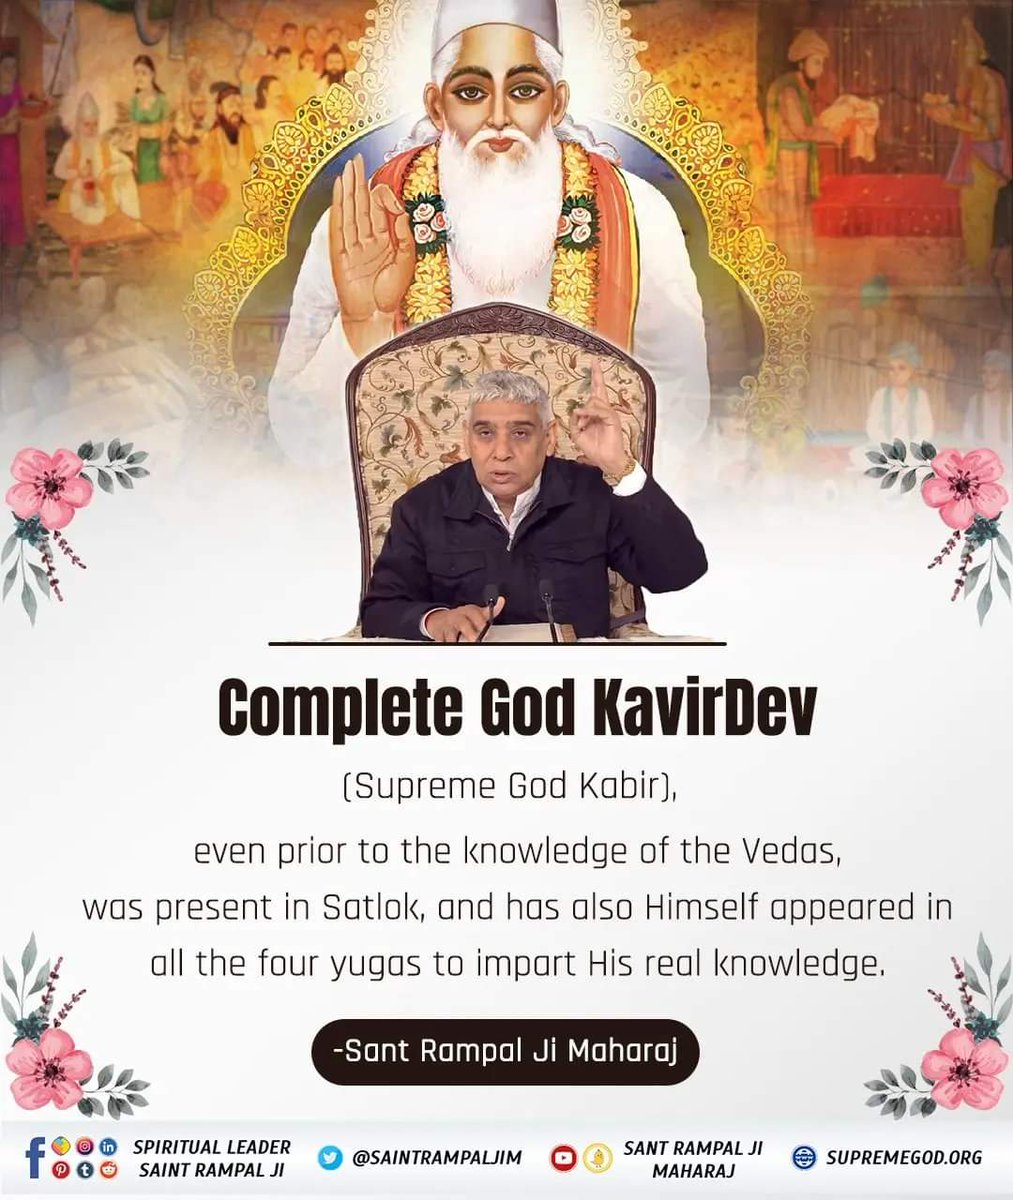 #GodMorningTuesday
COMPLETE GOD KAVIRDEV
(Supreme God Kabir),
even prior to the knowledge of the Vedas, was present in Satlok, and has also Himself appeared in all the four yugas to impart His real knowledge.
Visit Saint Rampal Ji Maharaj Youtube Channel
#tuesdaymotivations